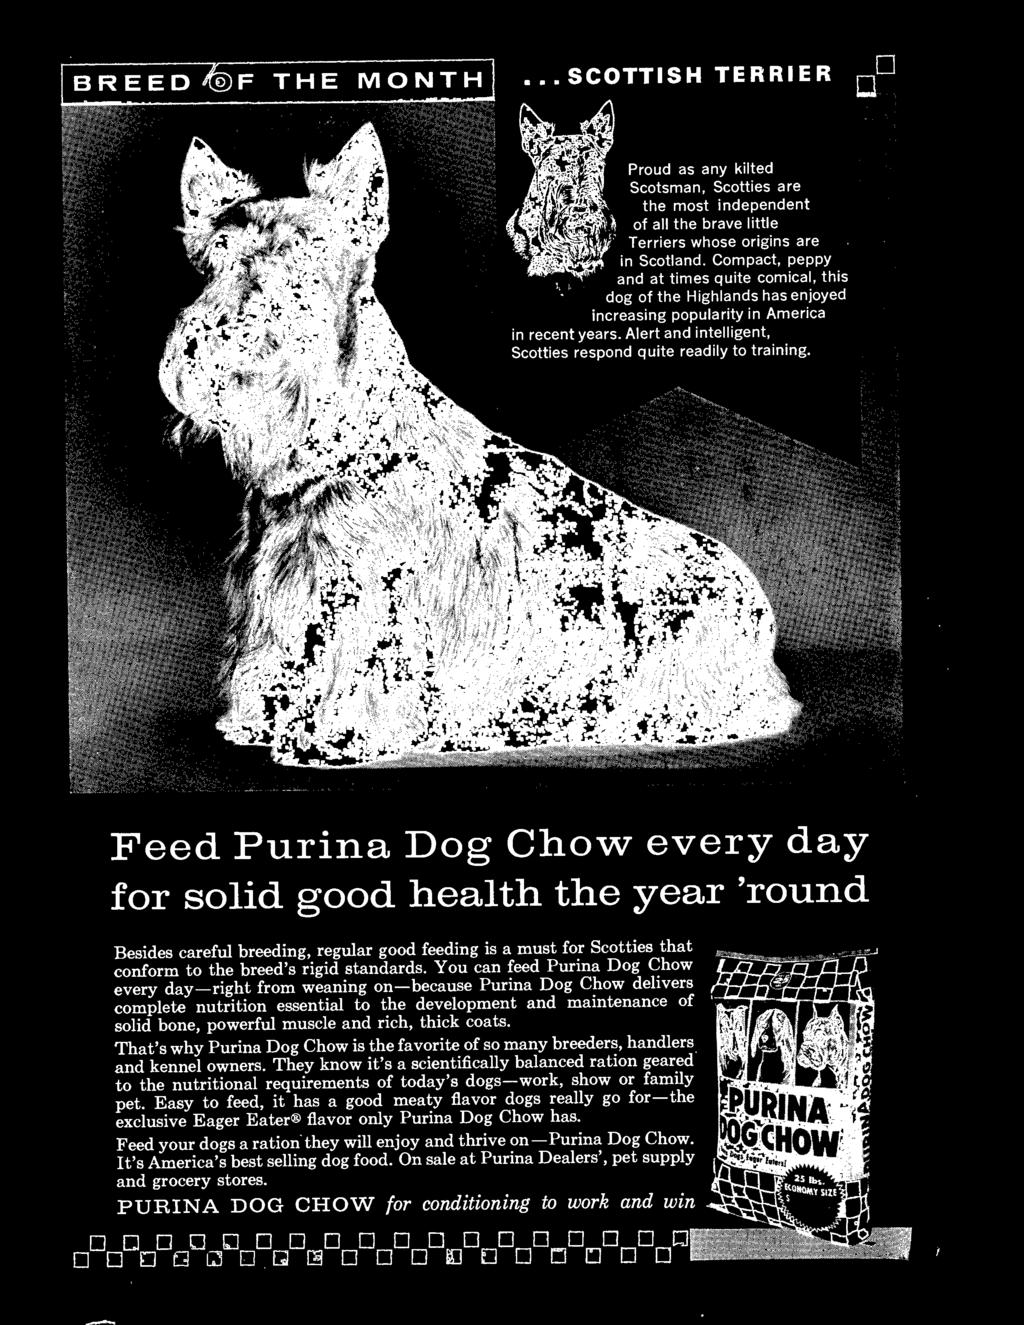 Easy to feed, it has a good meaty flavor dogs really go for-the exclusive Eager Eater flavor only Purina Dog Chow has. Feed your dogs a ration they will enjoy and thrive on-purina Dog Chow.